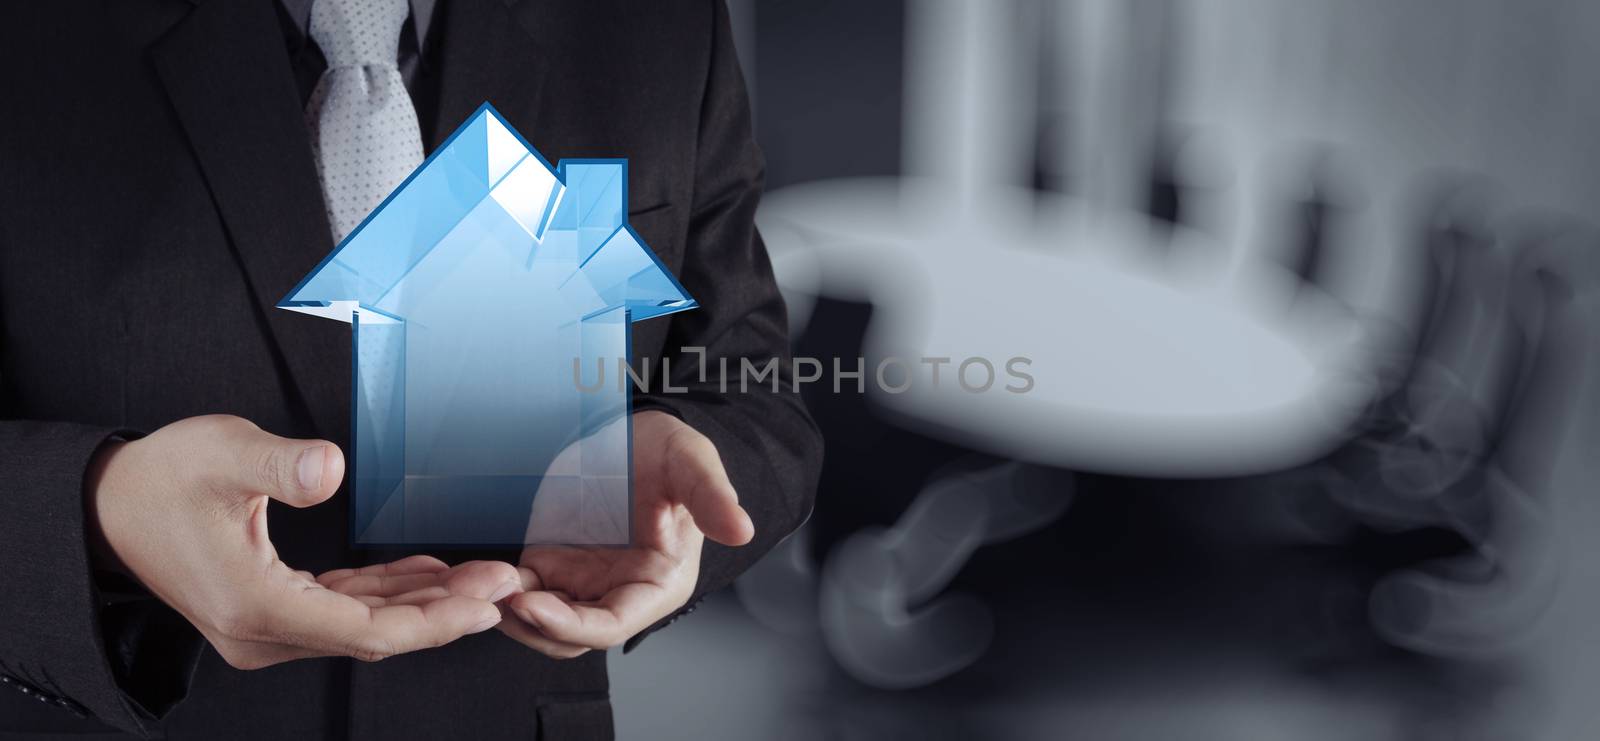 businessman hand working with new modern computer show social network structure as concept